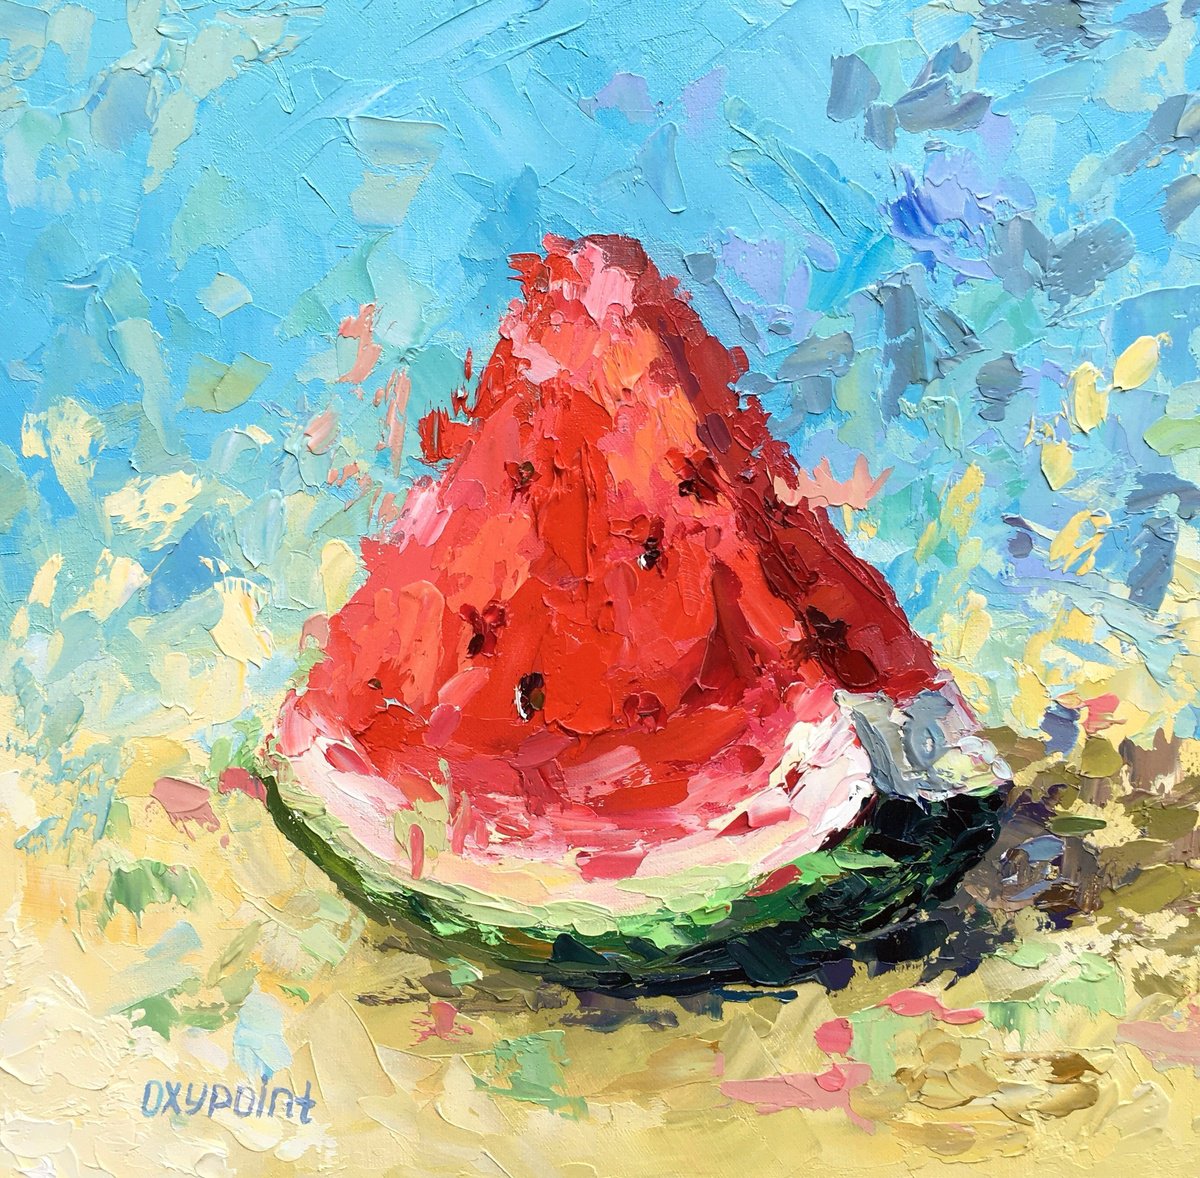 A slice of watermelon by OXYPOINT